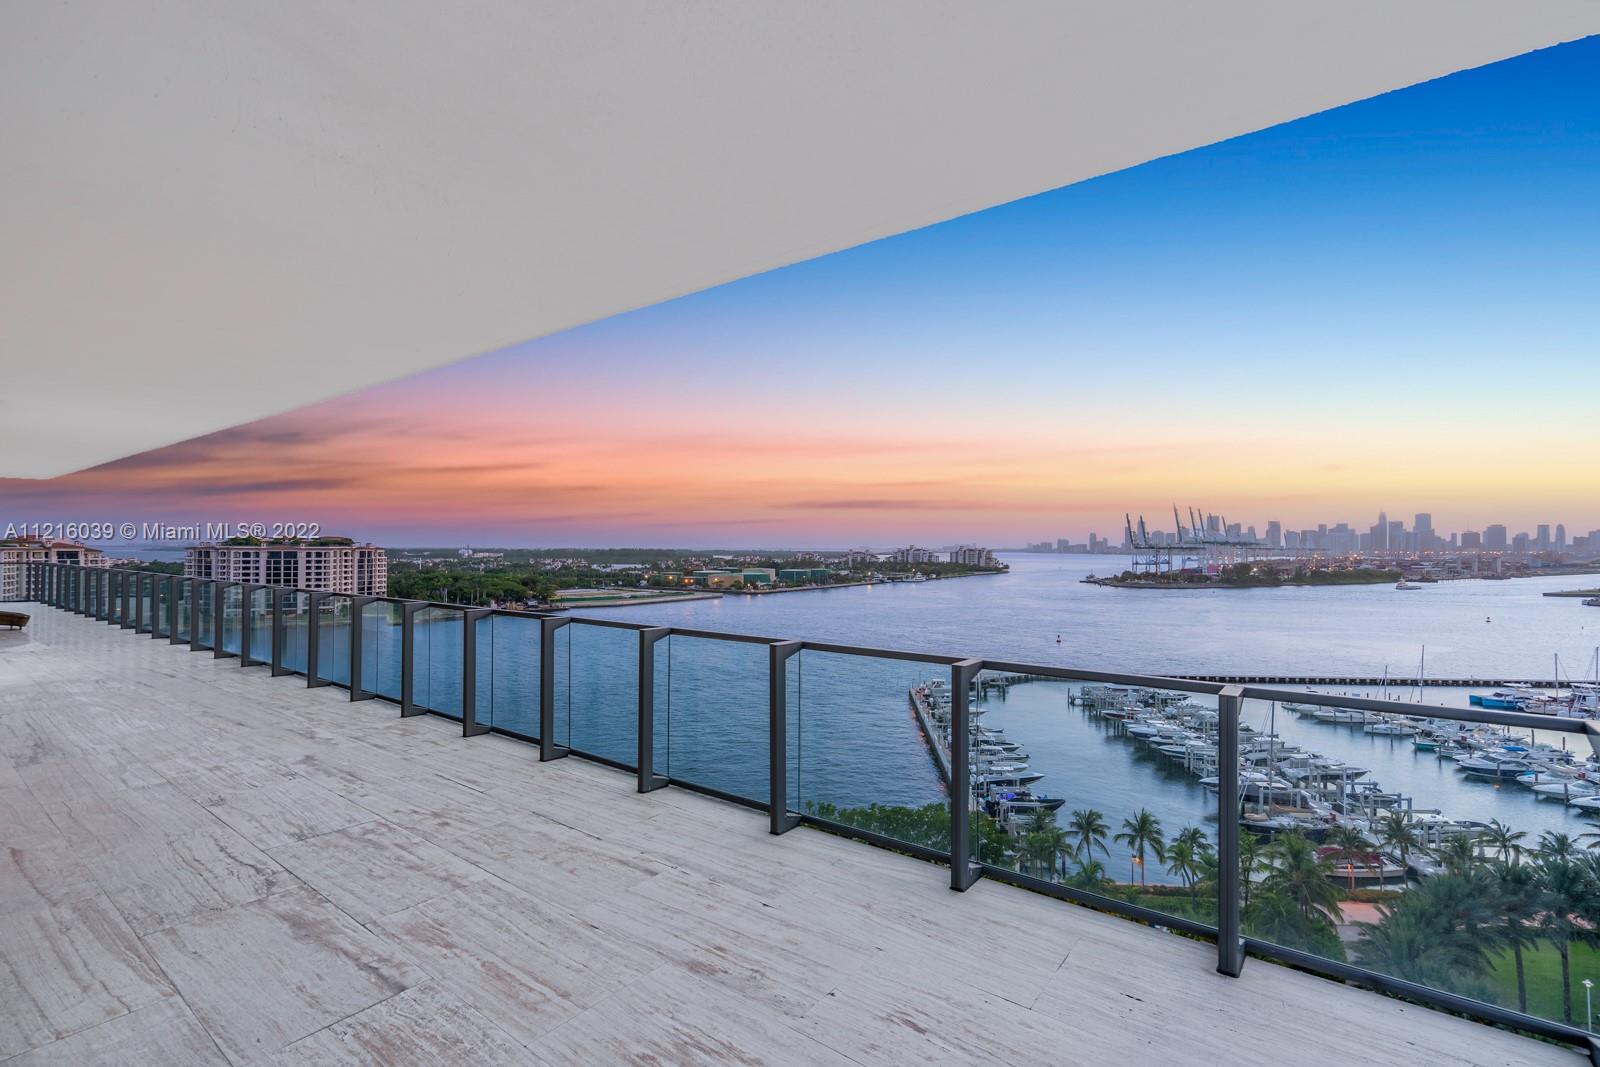 Located at the very southern tip of South Beach, this stunning residence offers exclusivity and privacy. With 4,200 SF of luxurious open plan living space, this 4 BD/3.5 BA comes with the finest of finishes. The kitchen highlights superb craftsmanship to include multiple ovens, gas appliances, sub-zero refrigerator, spacious island. With only 4-units per floor, take in the iconic Miami skyline and flow-through simultaneous views of the ocean and the city from your own 11-feet deep wrap-around balcony. Enjoy other state-of-the-art amenities like floor-to-ceiling impact and sound resistant windows crafted from a special "pure and clear" glass, beautiful marble flooring, and more! Infinity pool area and private 2-car air-conditioned garage included.